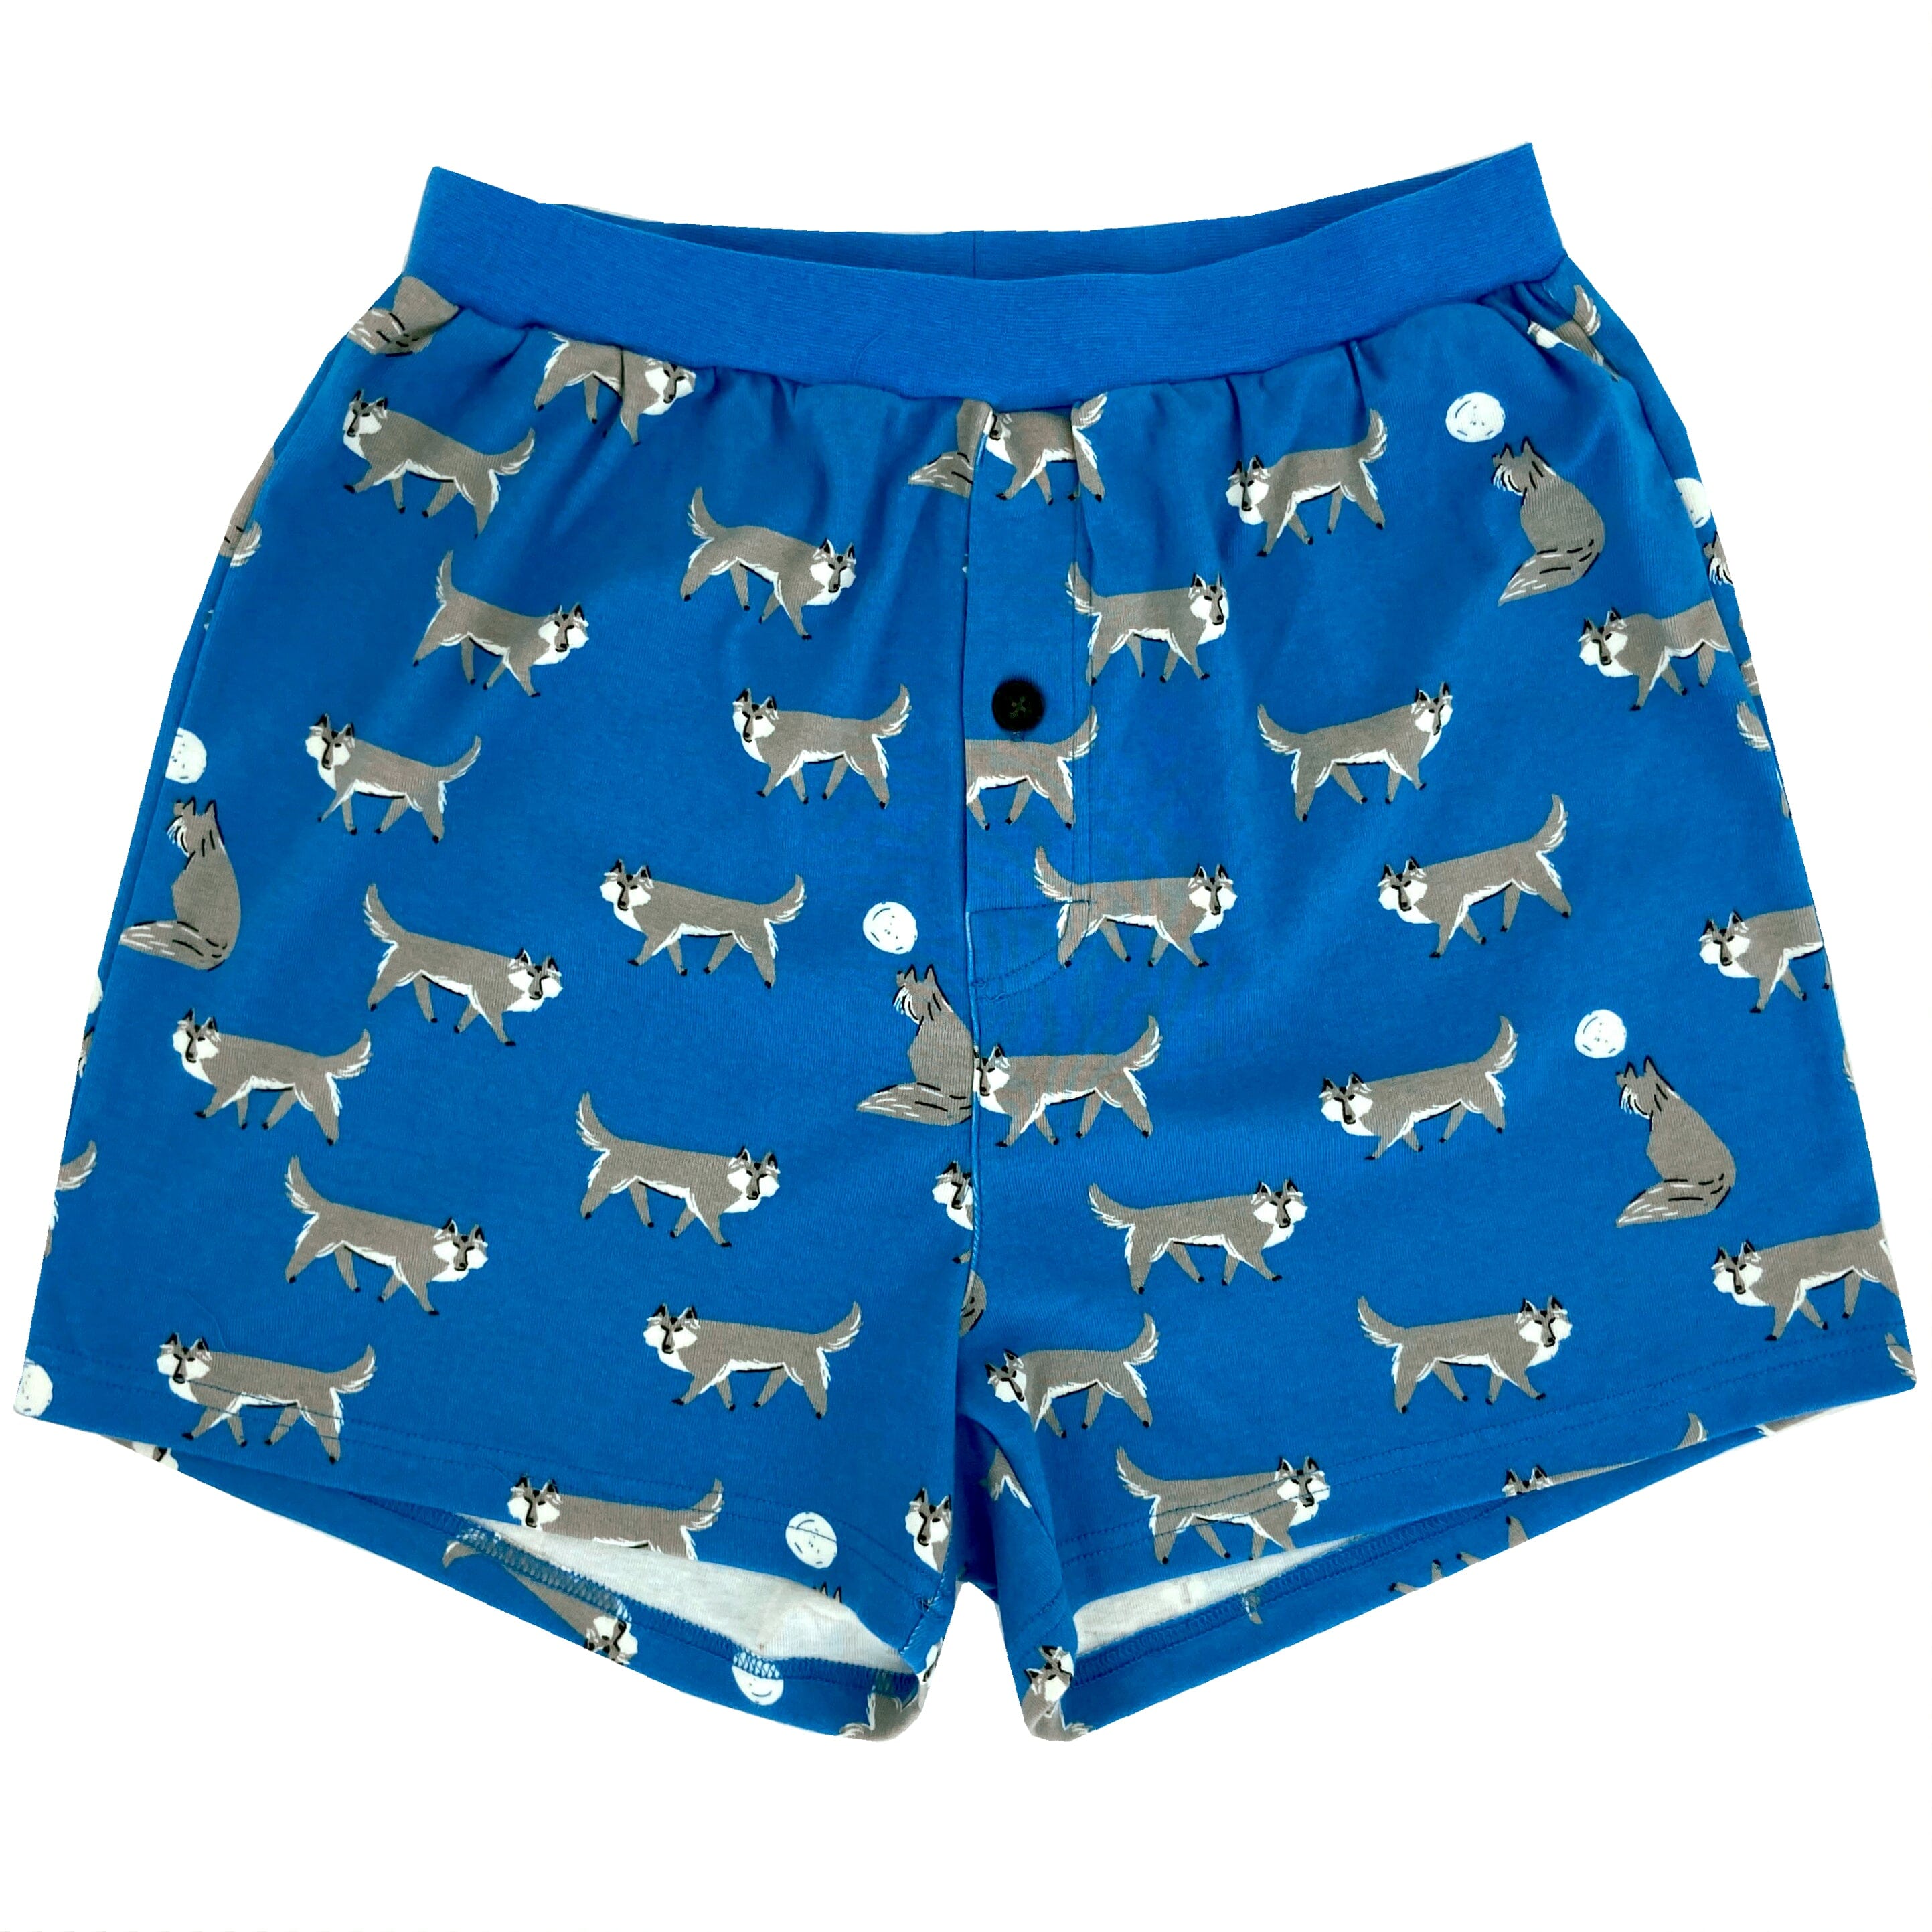 Men's Grey Wolves All Over Print Soft Cotton Knit Boxer Pajama Shorts